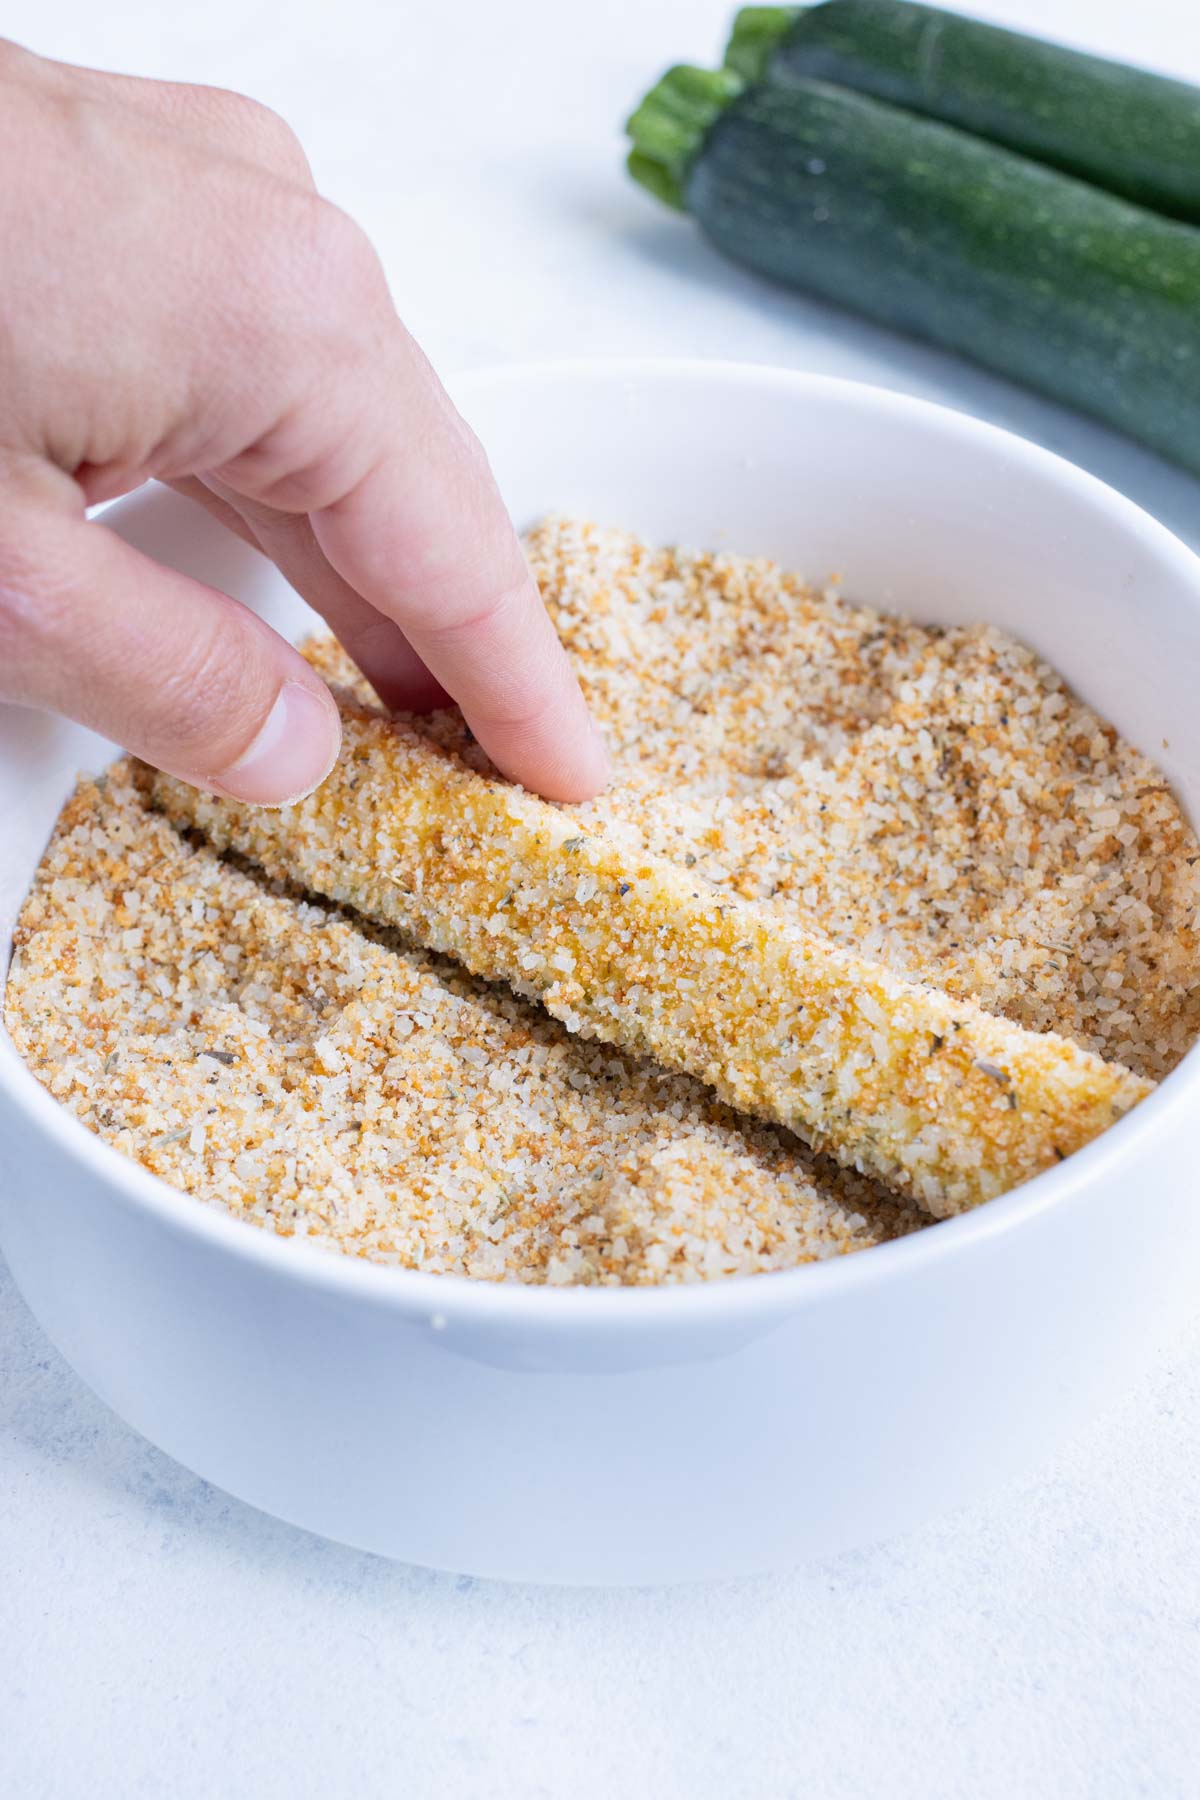 A hand holds a zucchini fry over a bowl with seasonings and breadcrumbs.